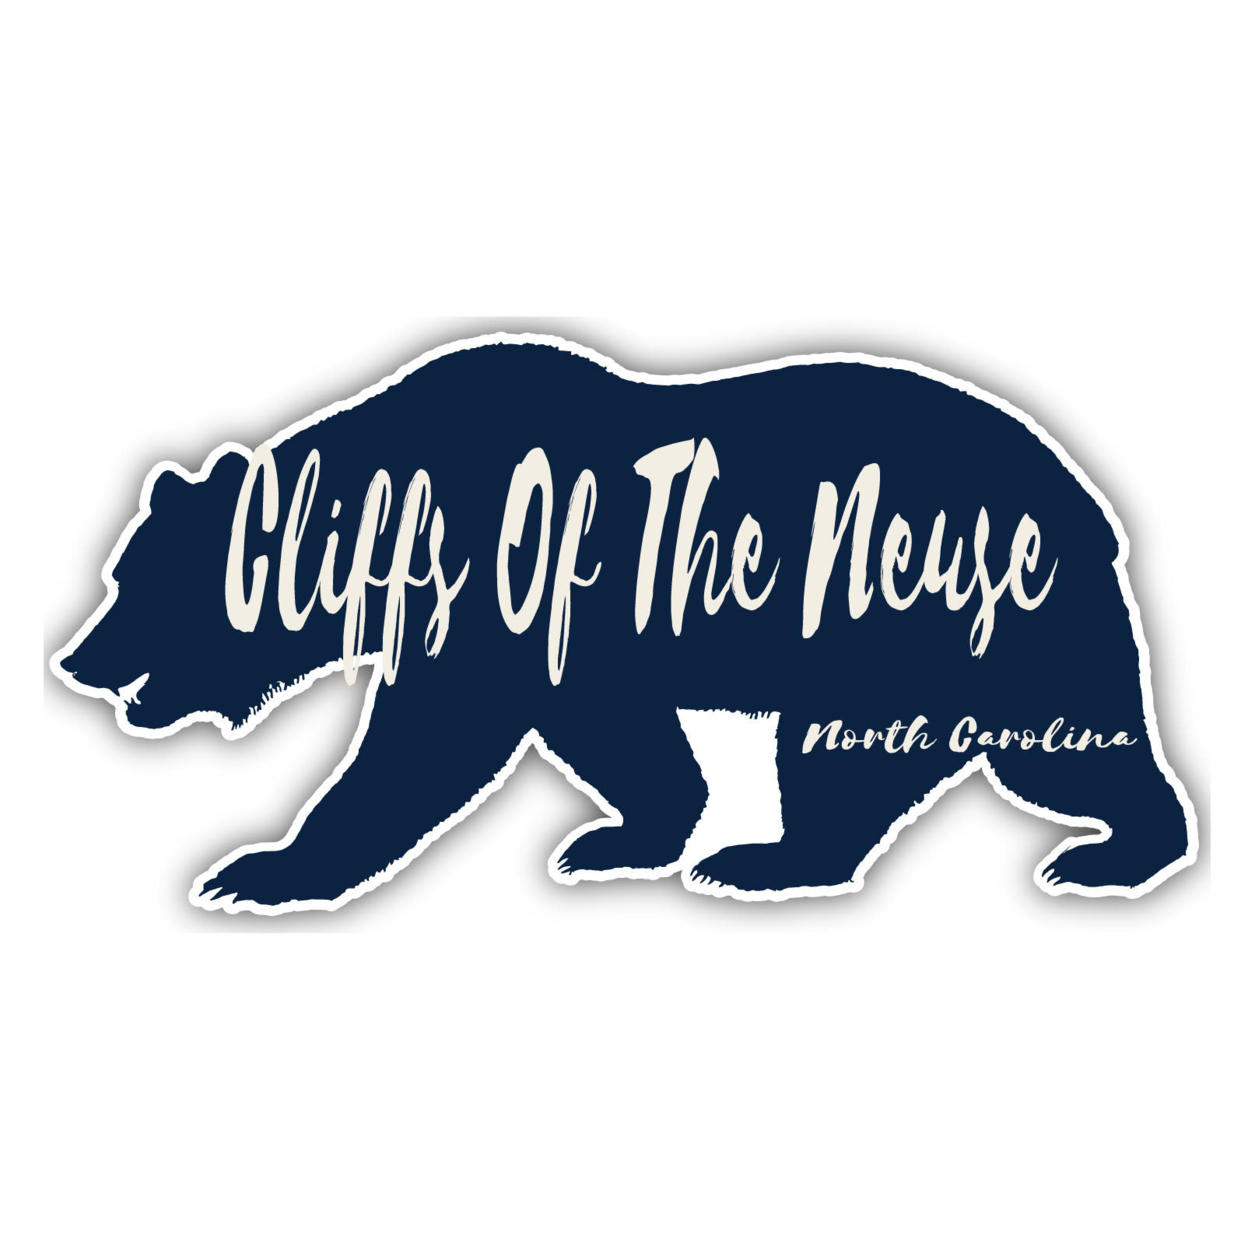 Cliffs Of The Neuse North Carolina Souvenir Decorative Stickers (Choose Theme And Size) - 4-Pack, 10-Inch, Bear